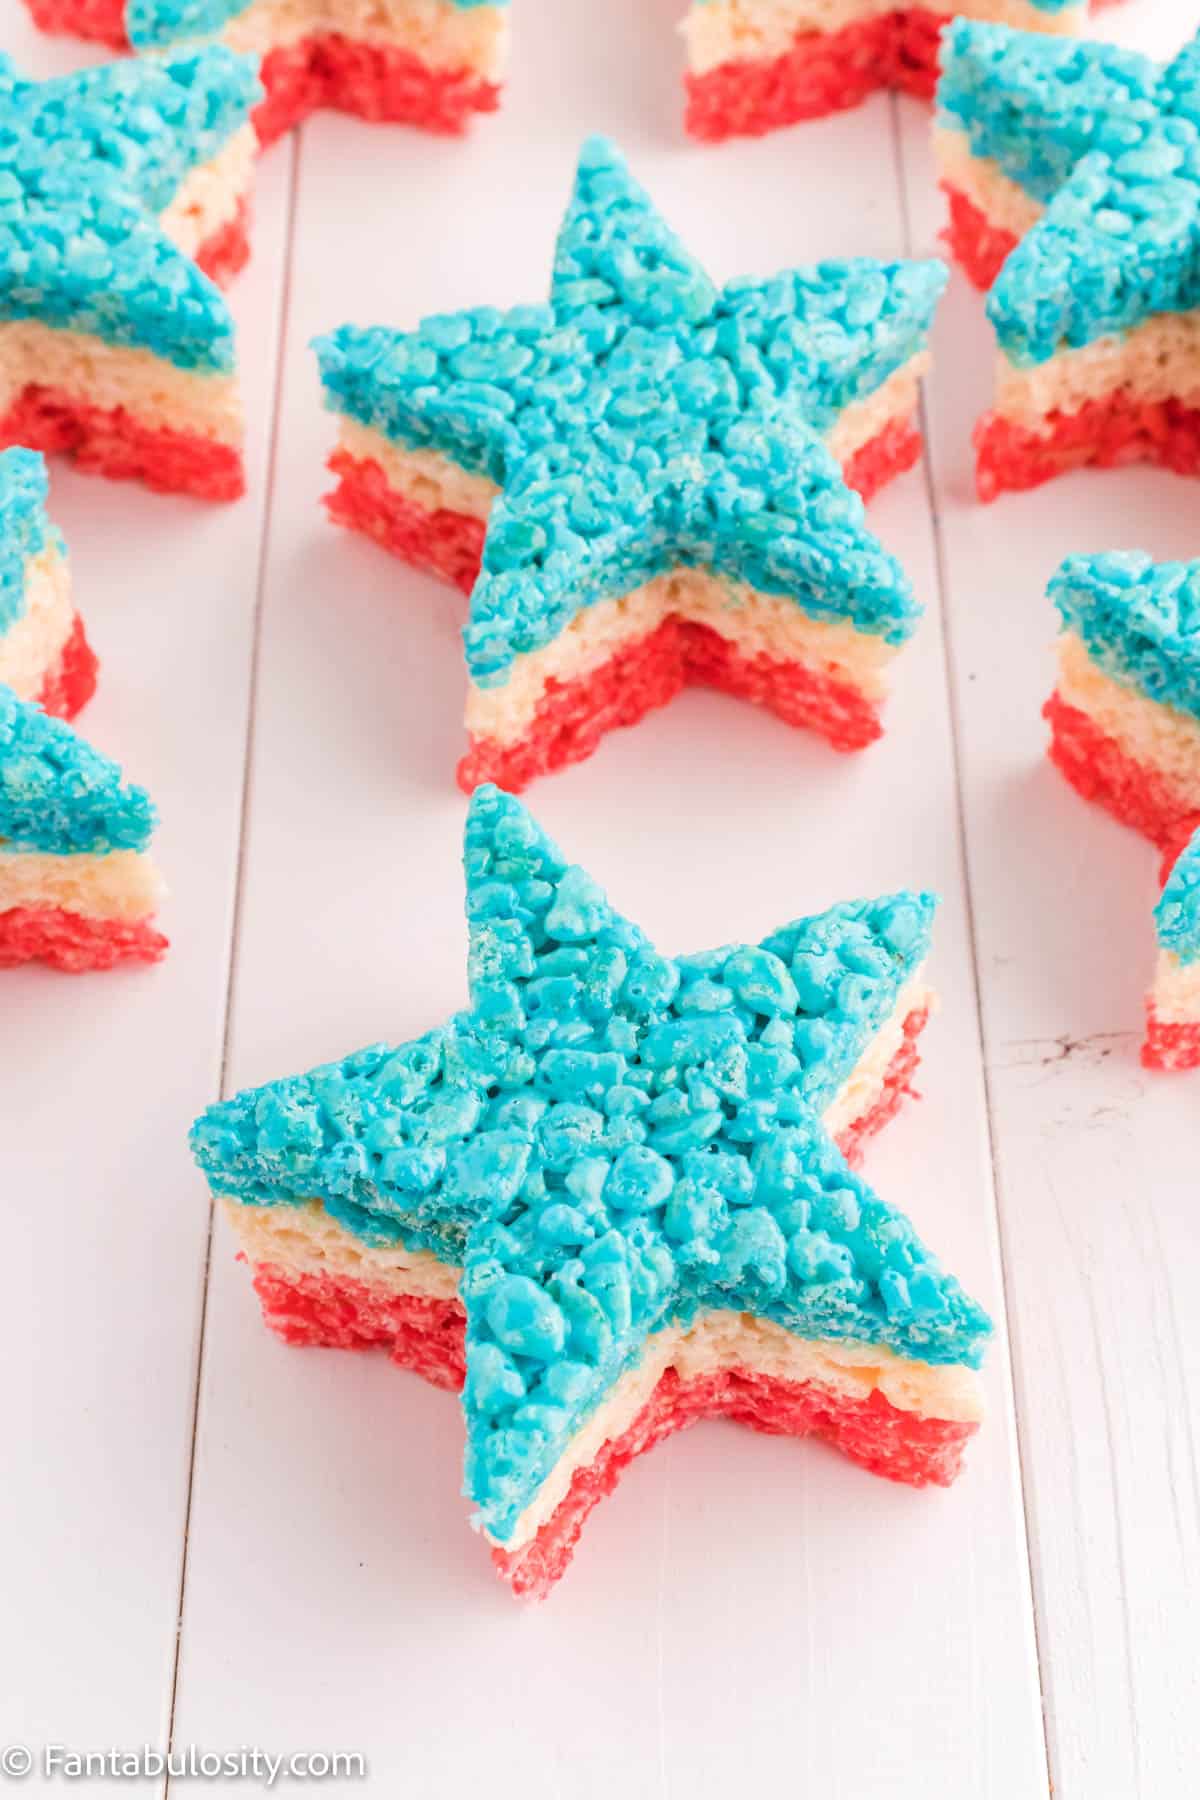 Several red, white, and blue star shaped Rice Krispie treats sitting on a counter.